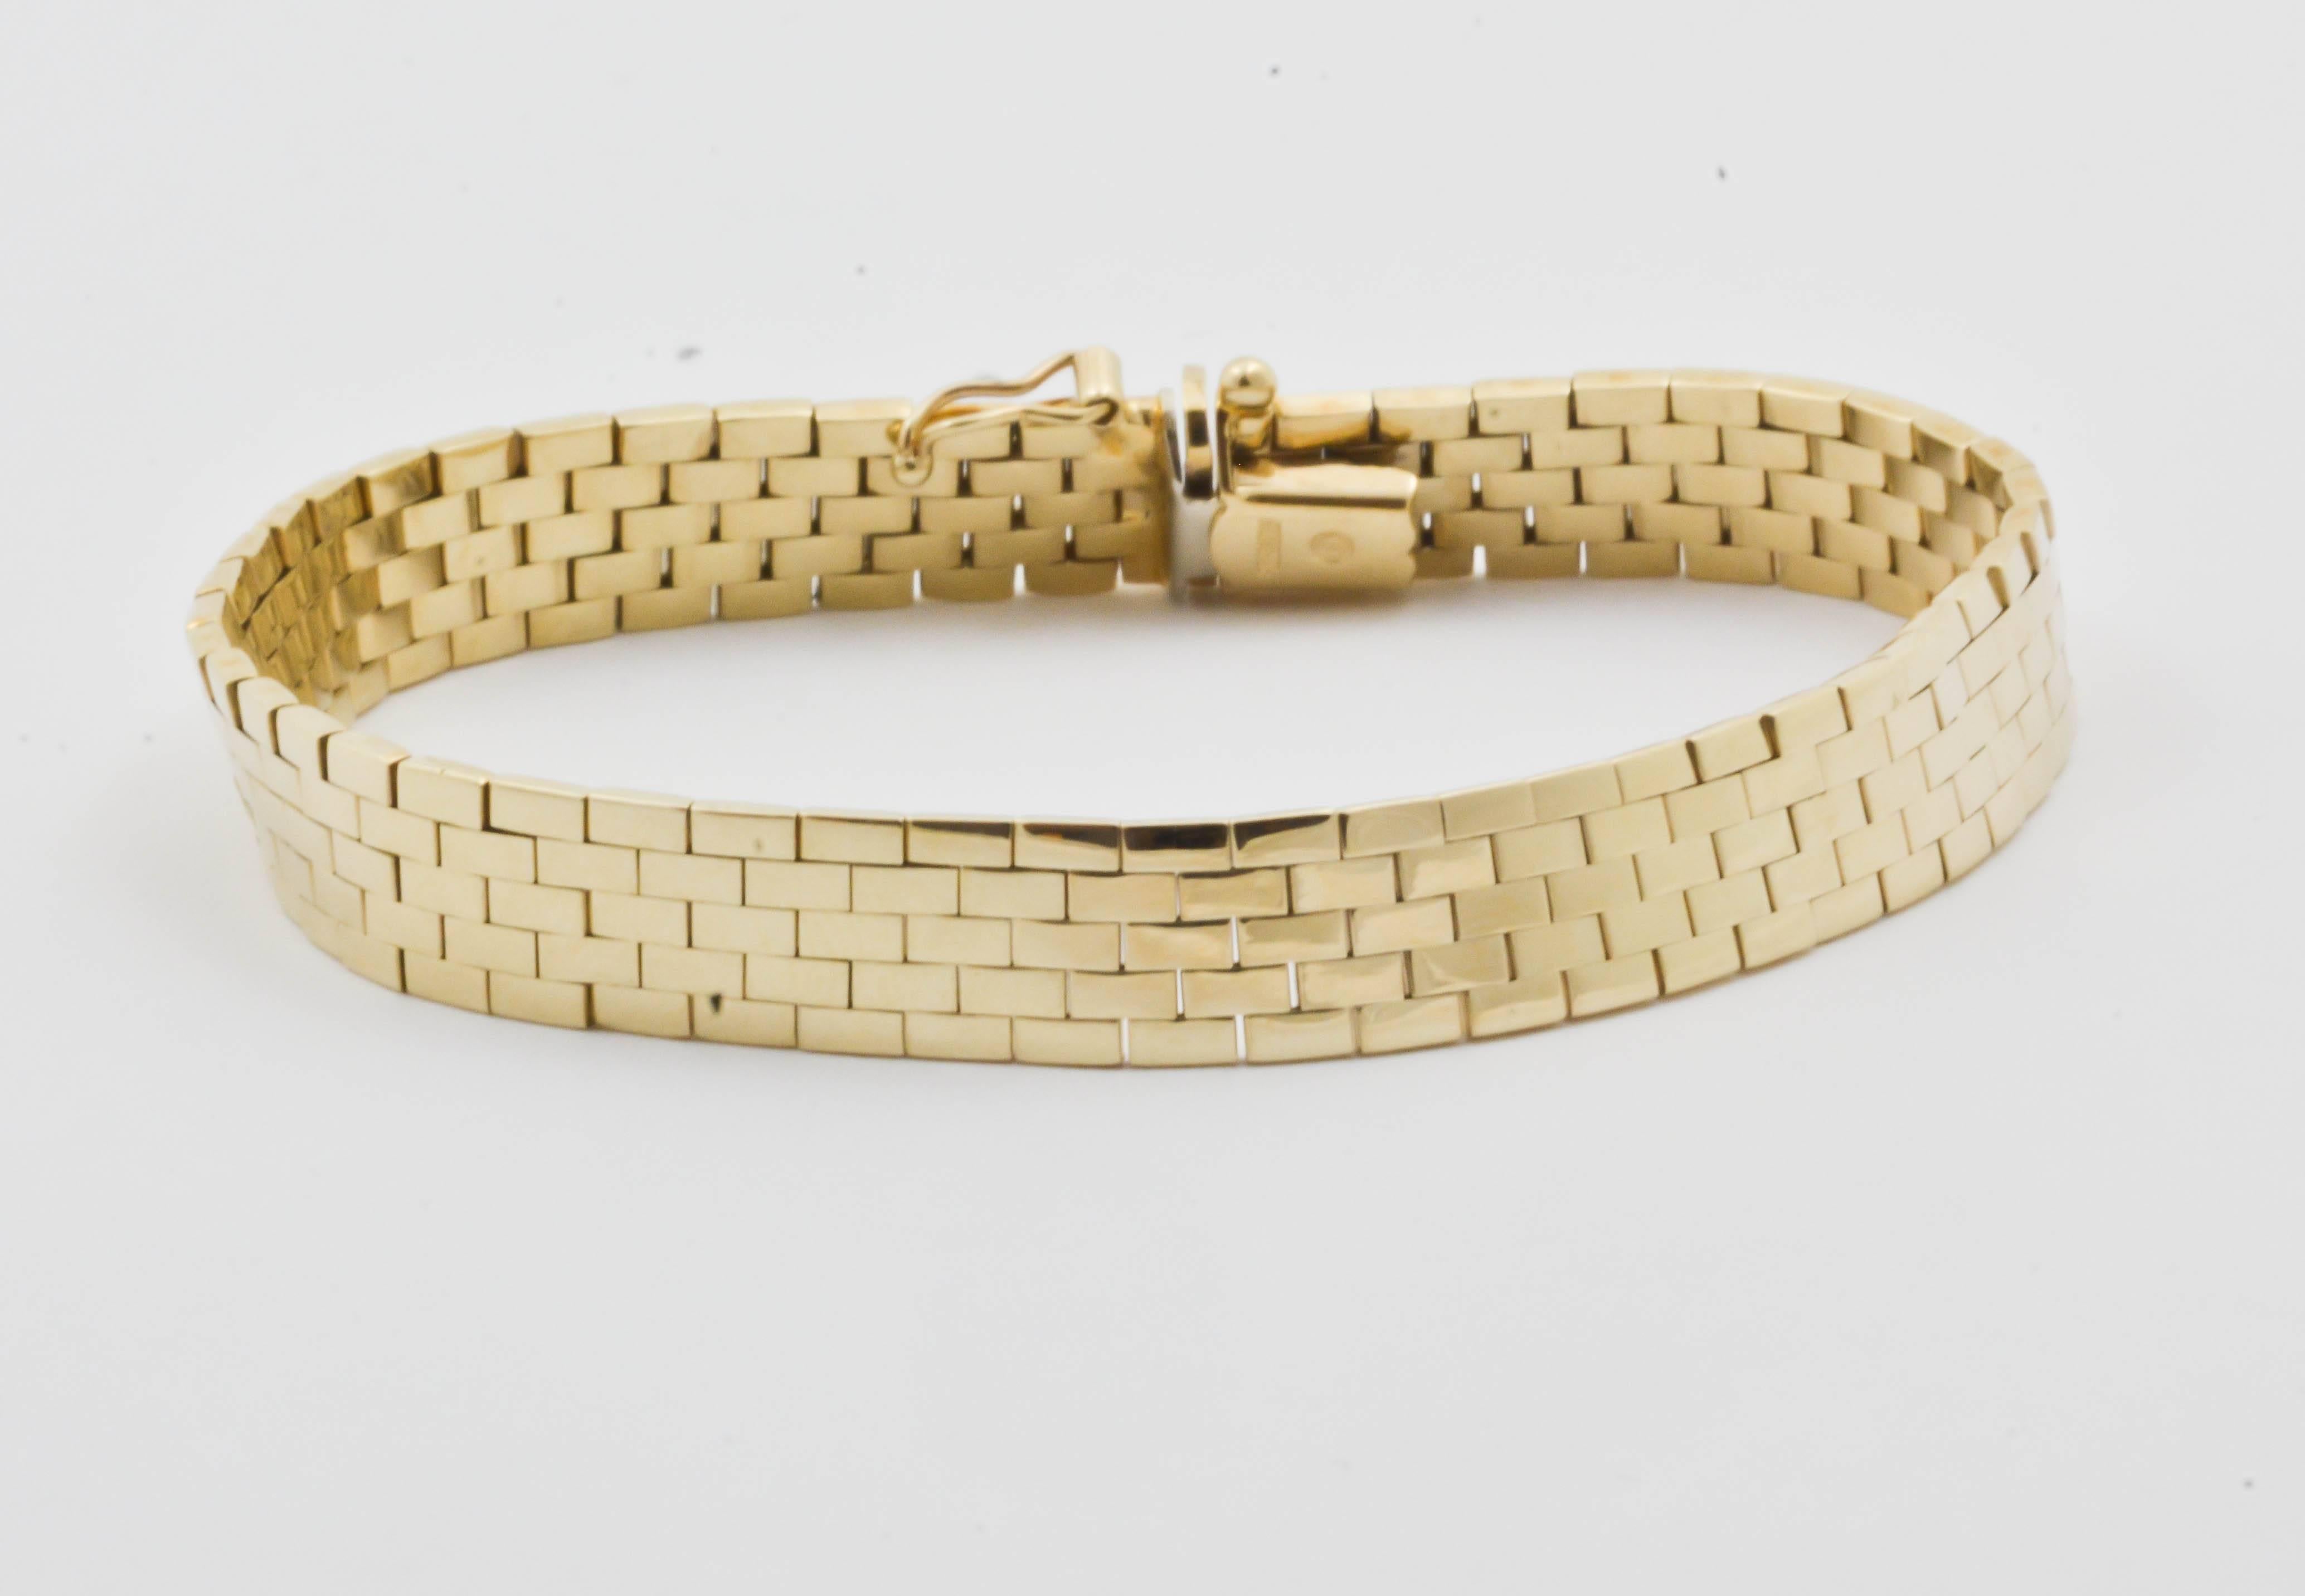 A classic 14kt yellow gold brick patterned bracelet is stunning with it's beautiful high polished mirror finish.  The bracelet measures 8.25 mm wide and 1.5 mm thick.  The bracelet feels so soft and supple with its well executed hinges.  The